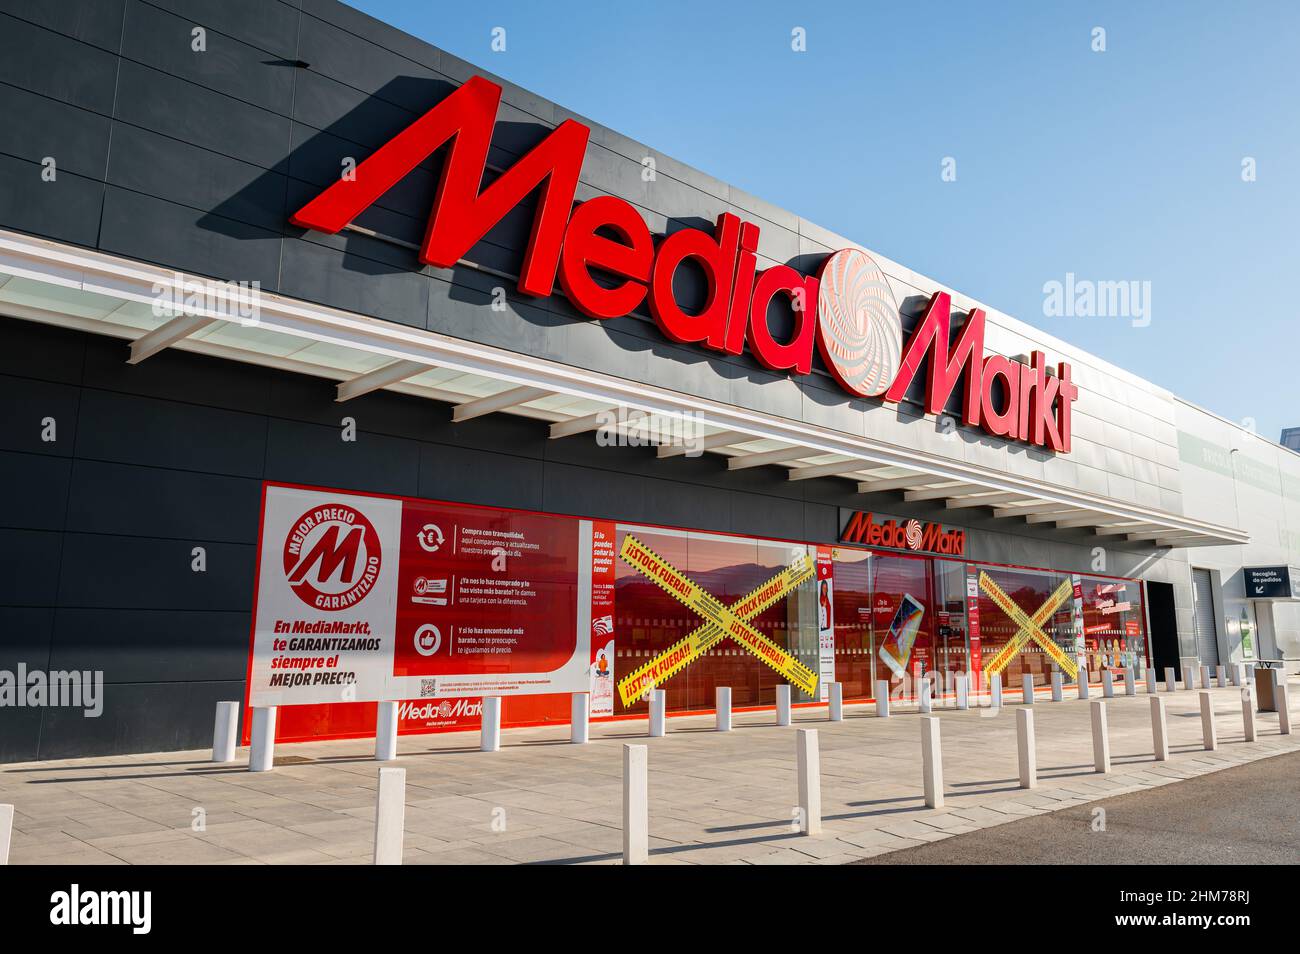 Media Markt in Malaga - All you need to know, opening time and location